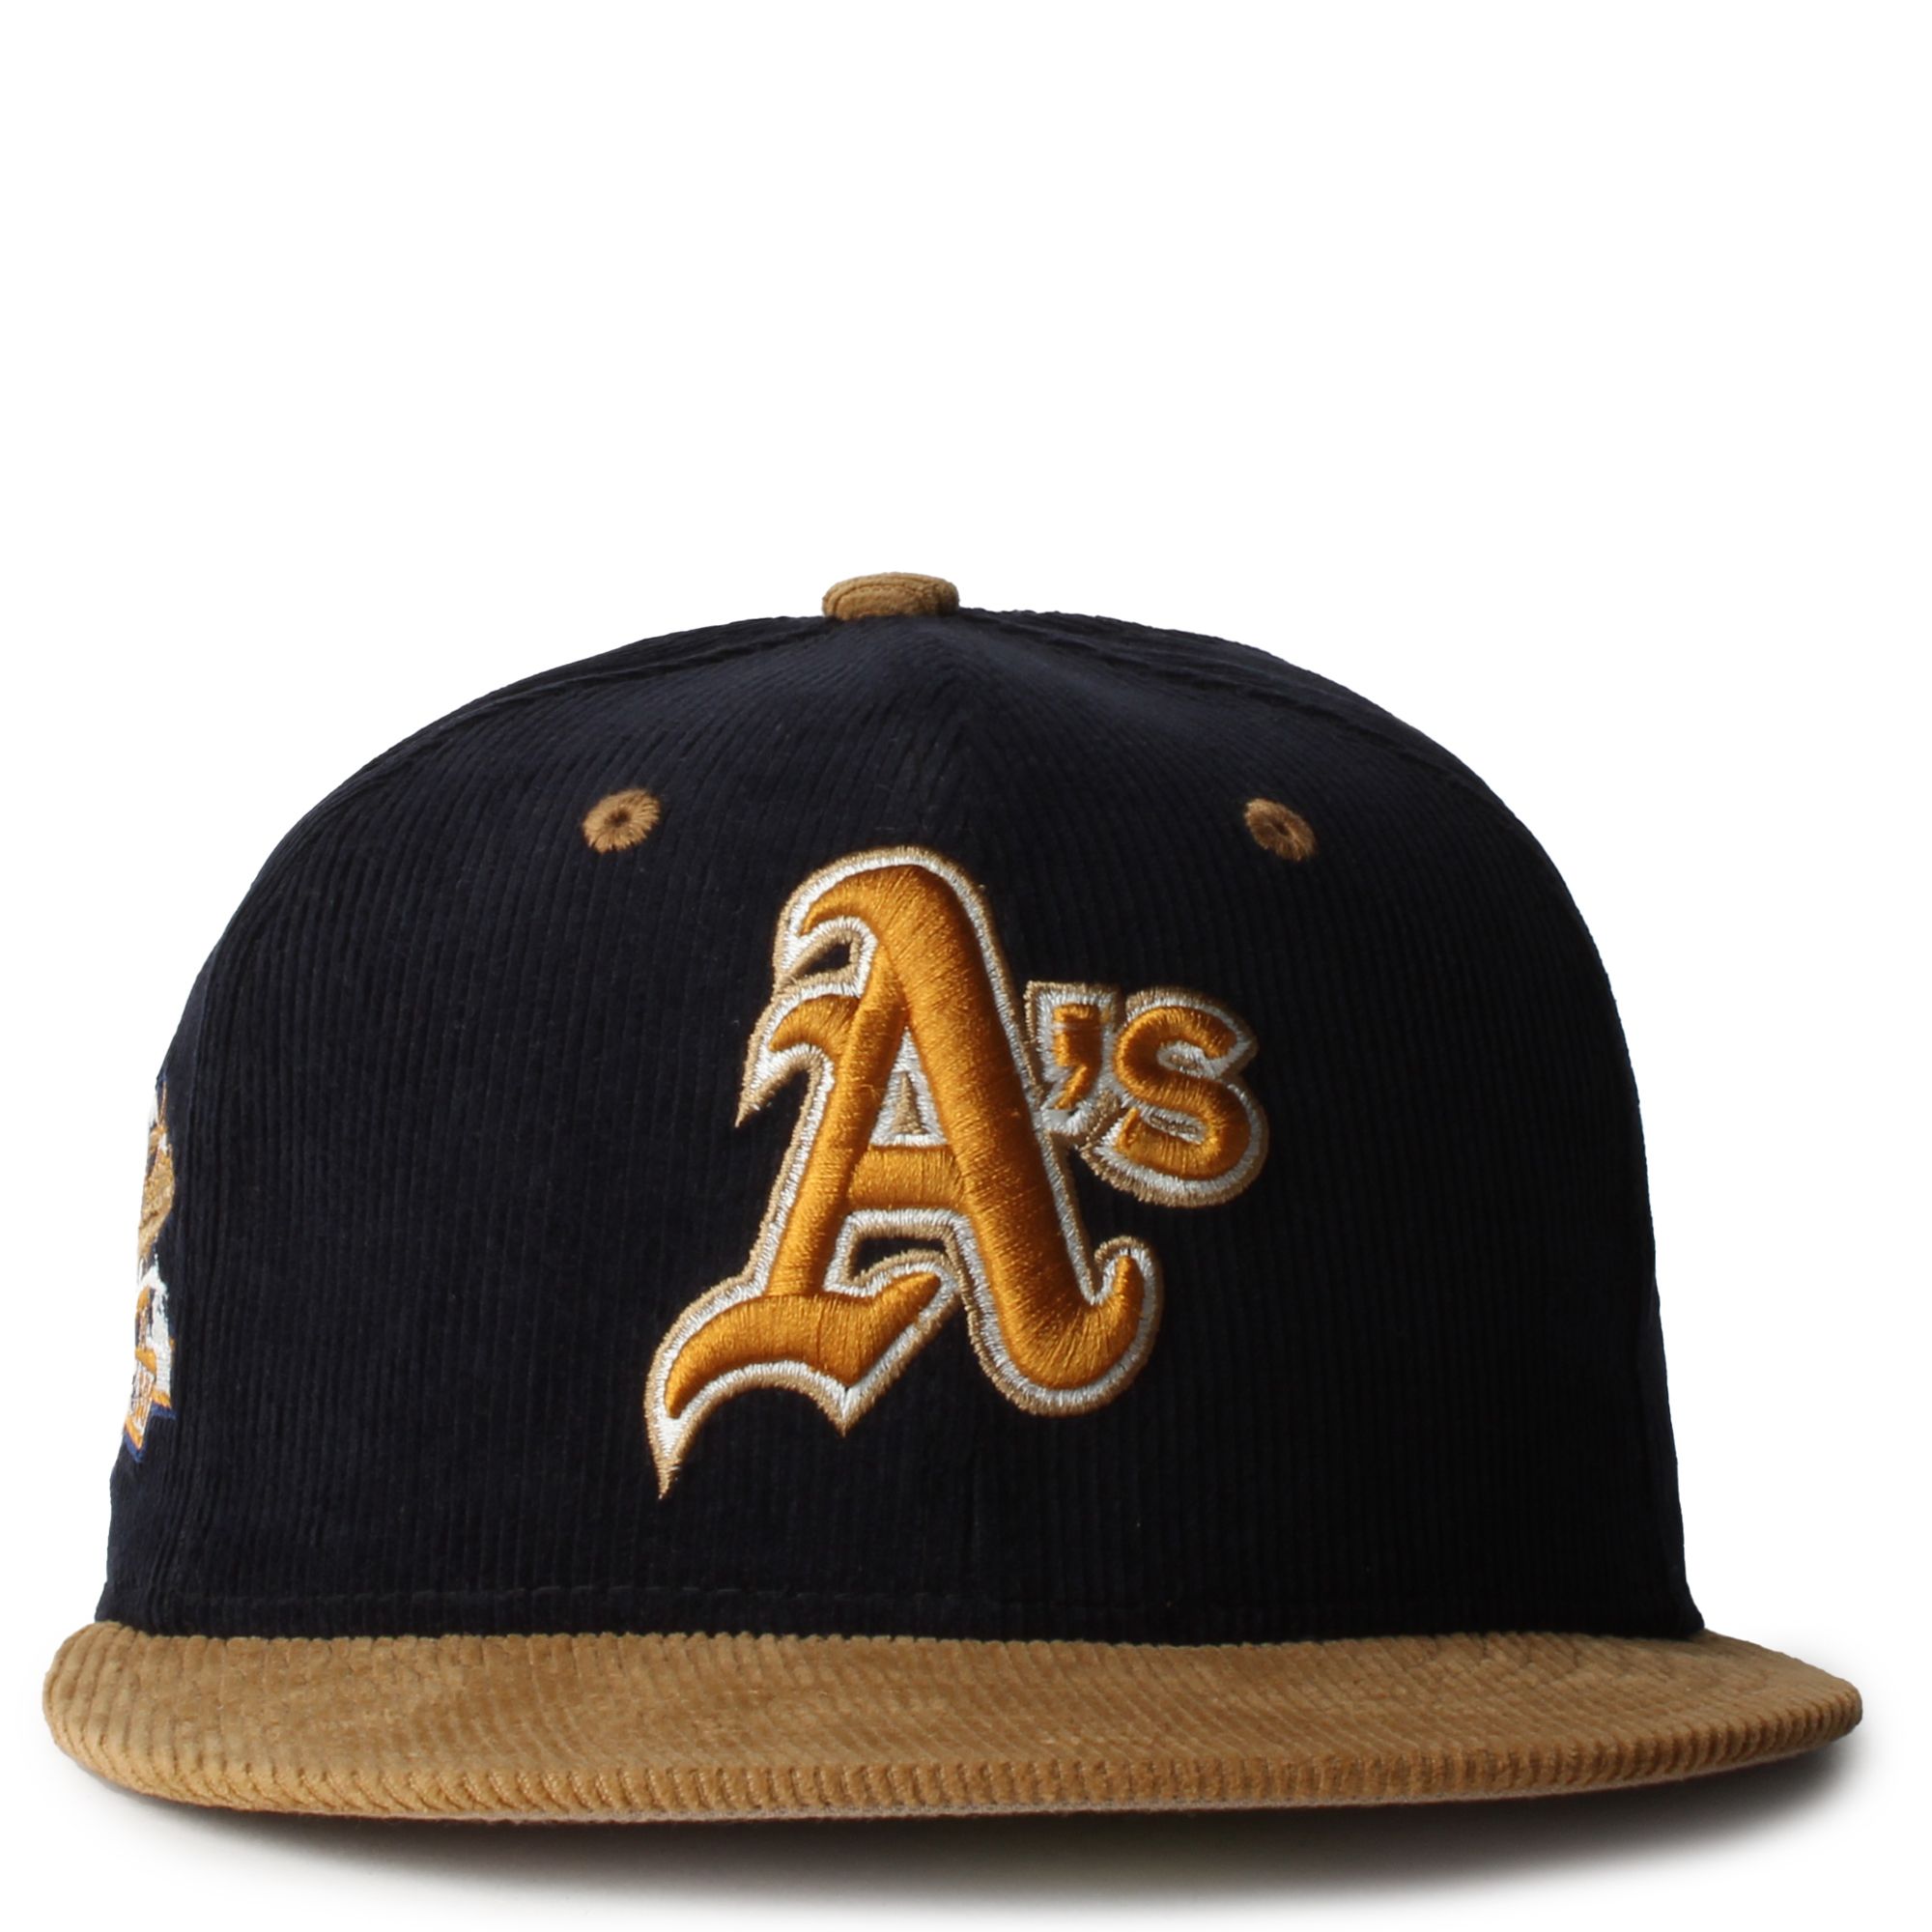 New Era Caps Oakland Athletics 59FIFTY Fitted Hat Black